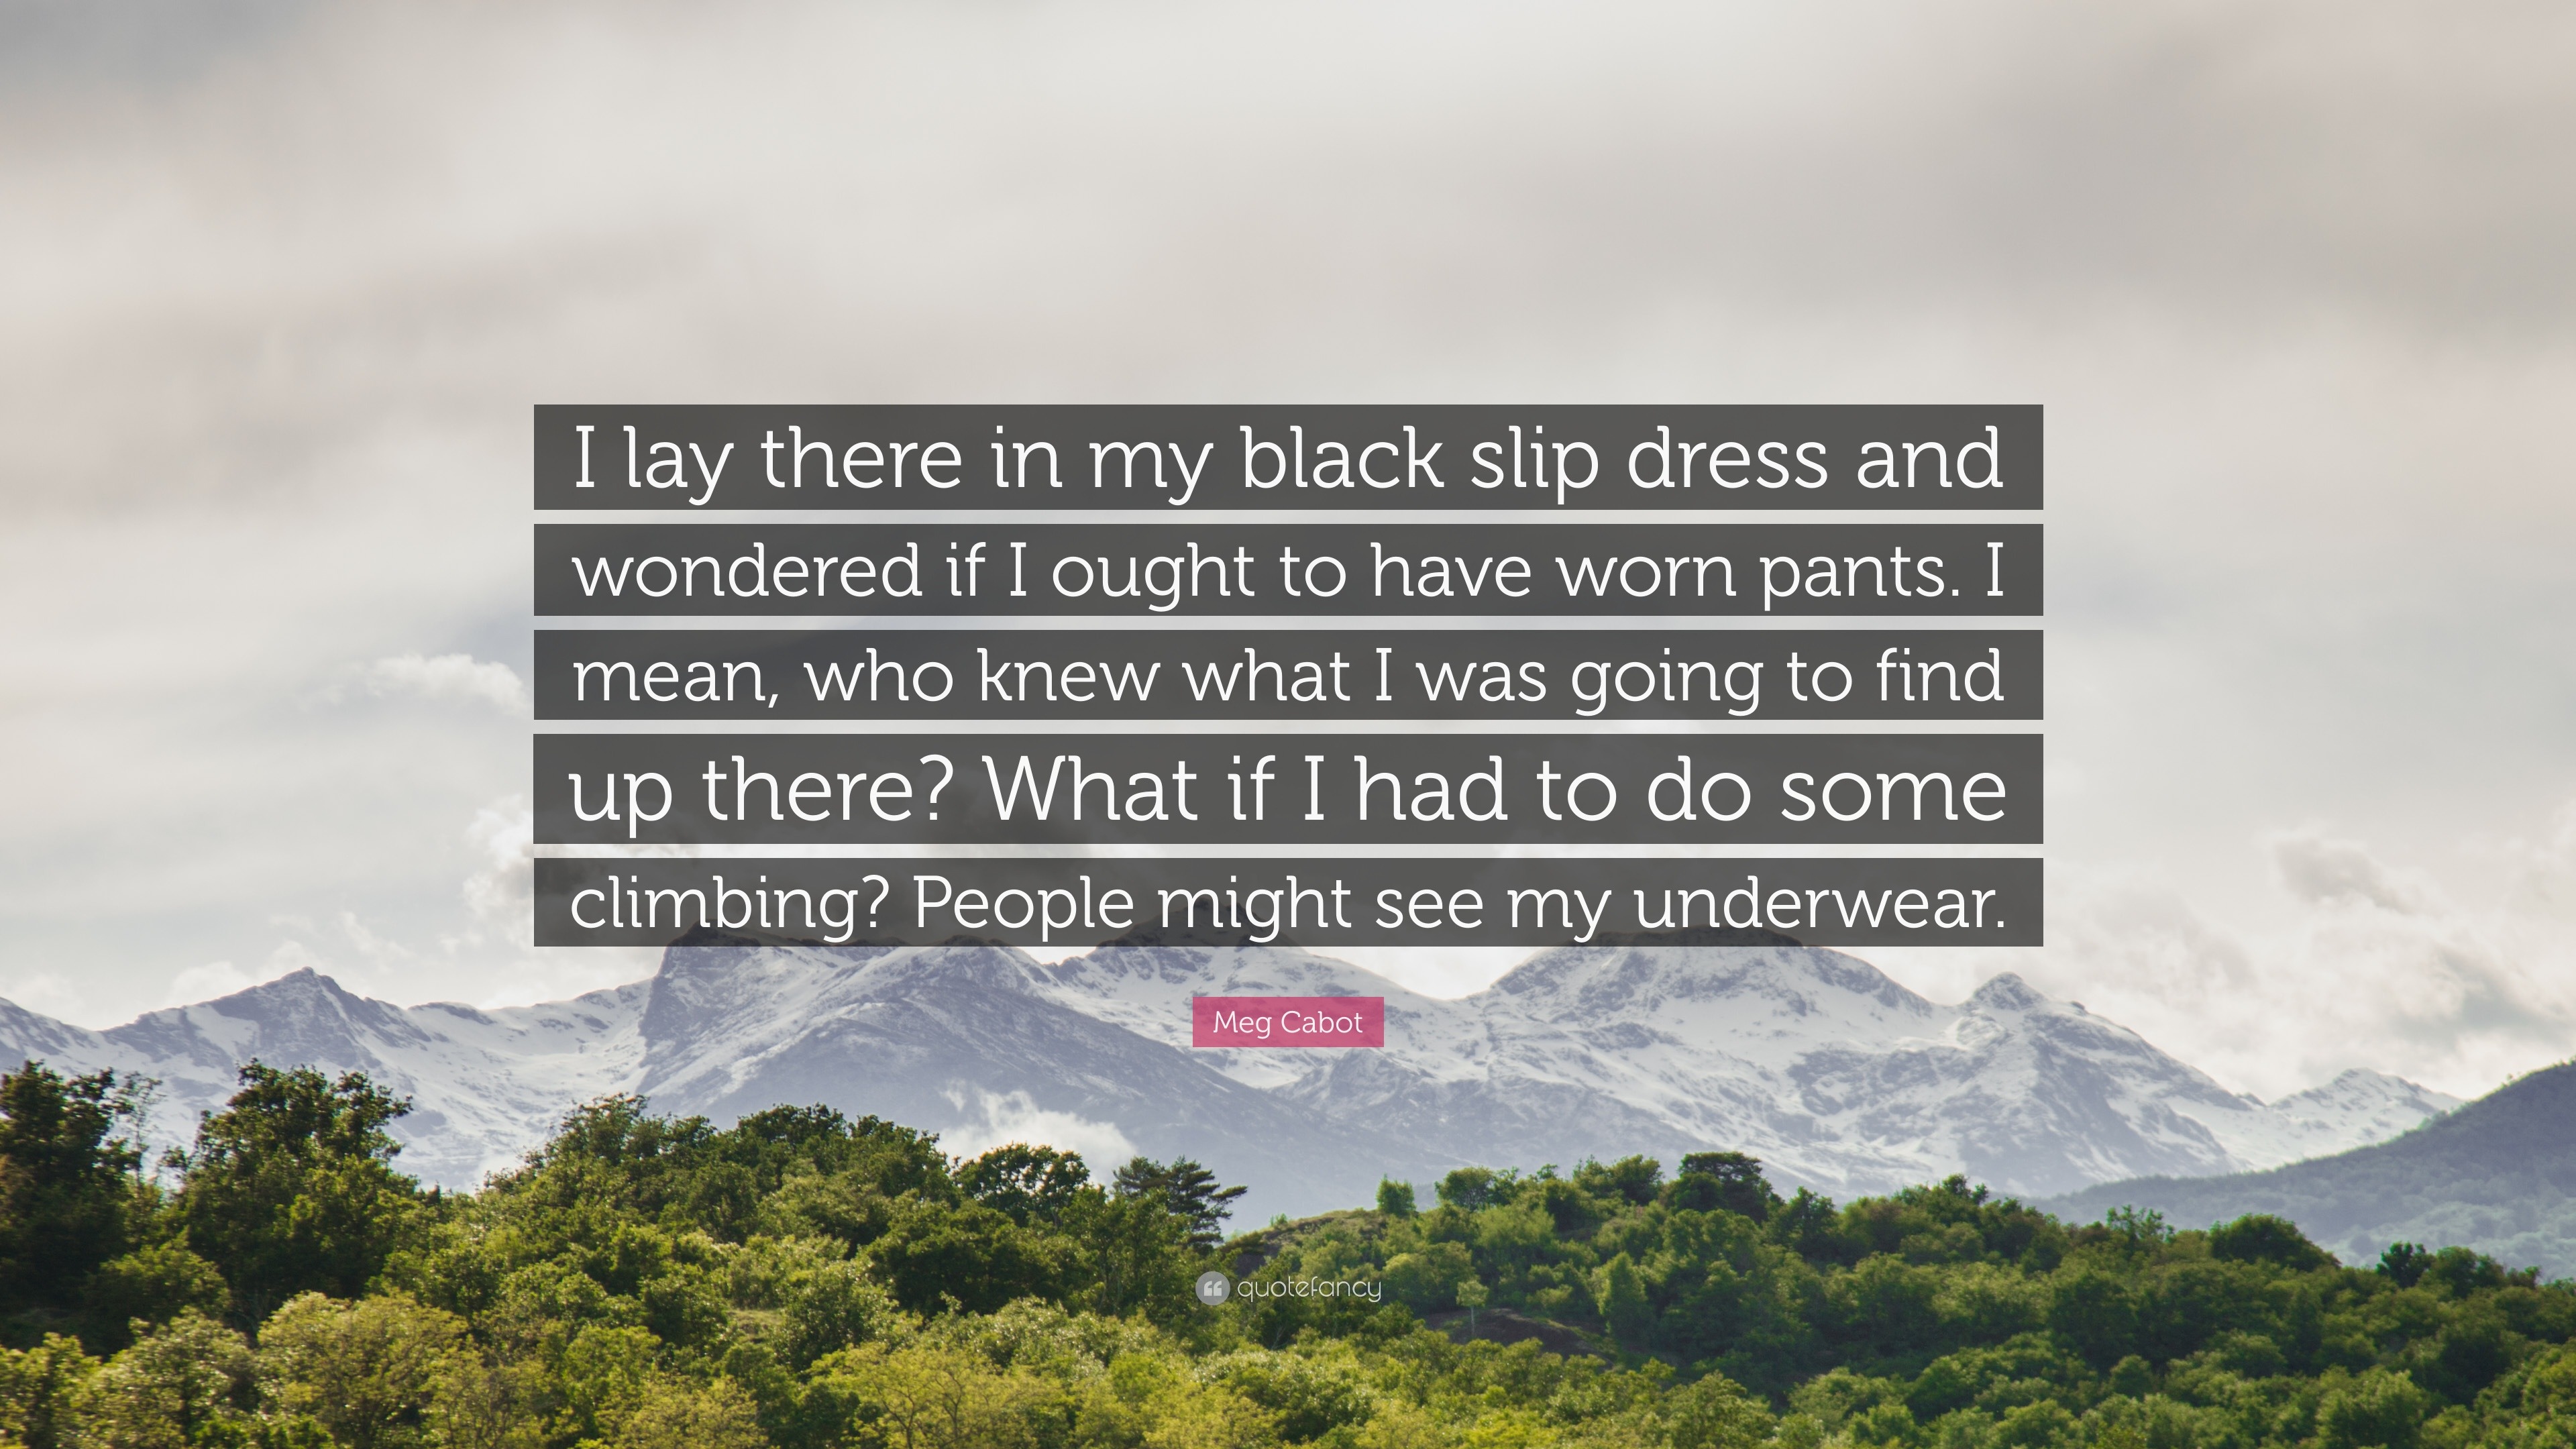 Meg Cabot Quote: “I lay there in my black slip dress and wondered ...